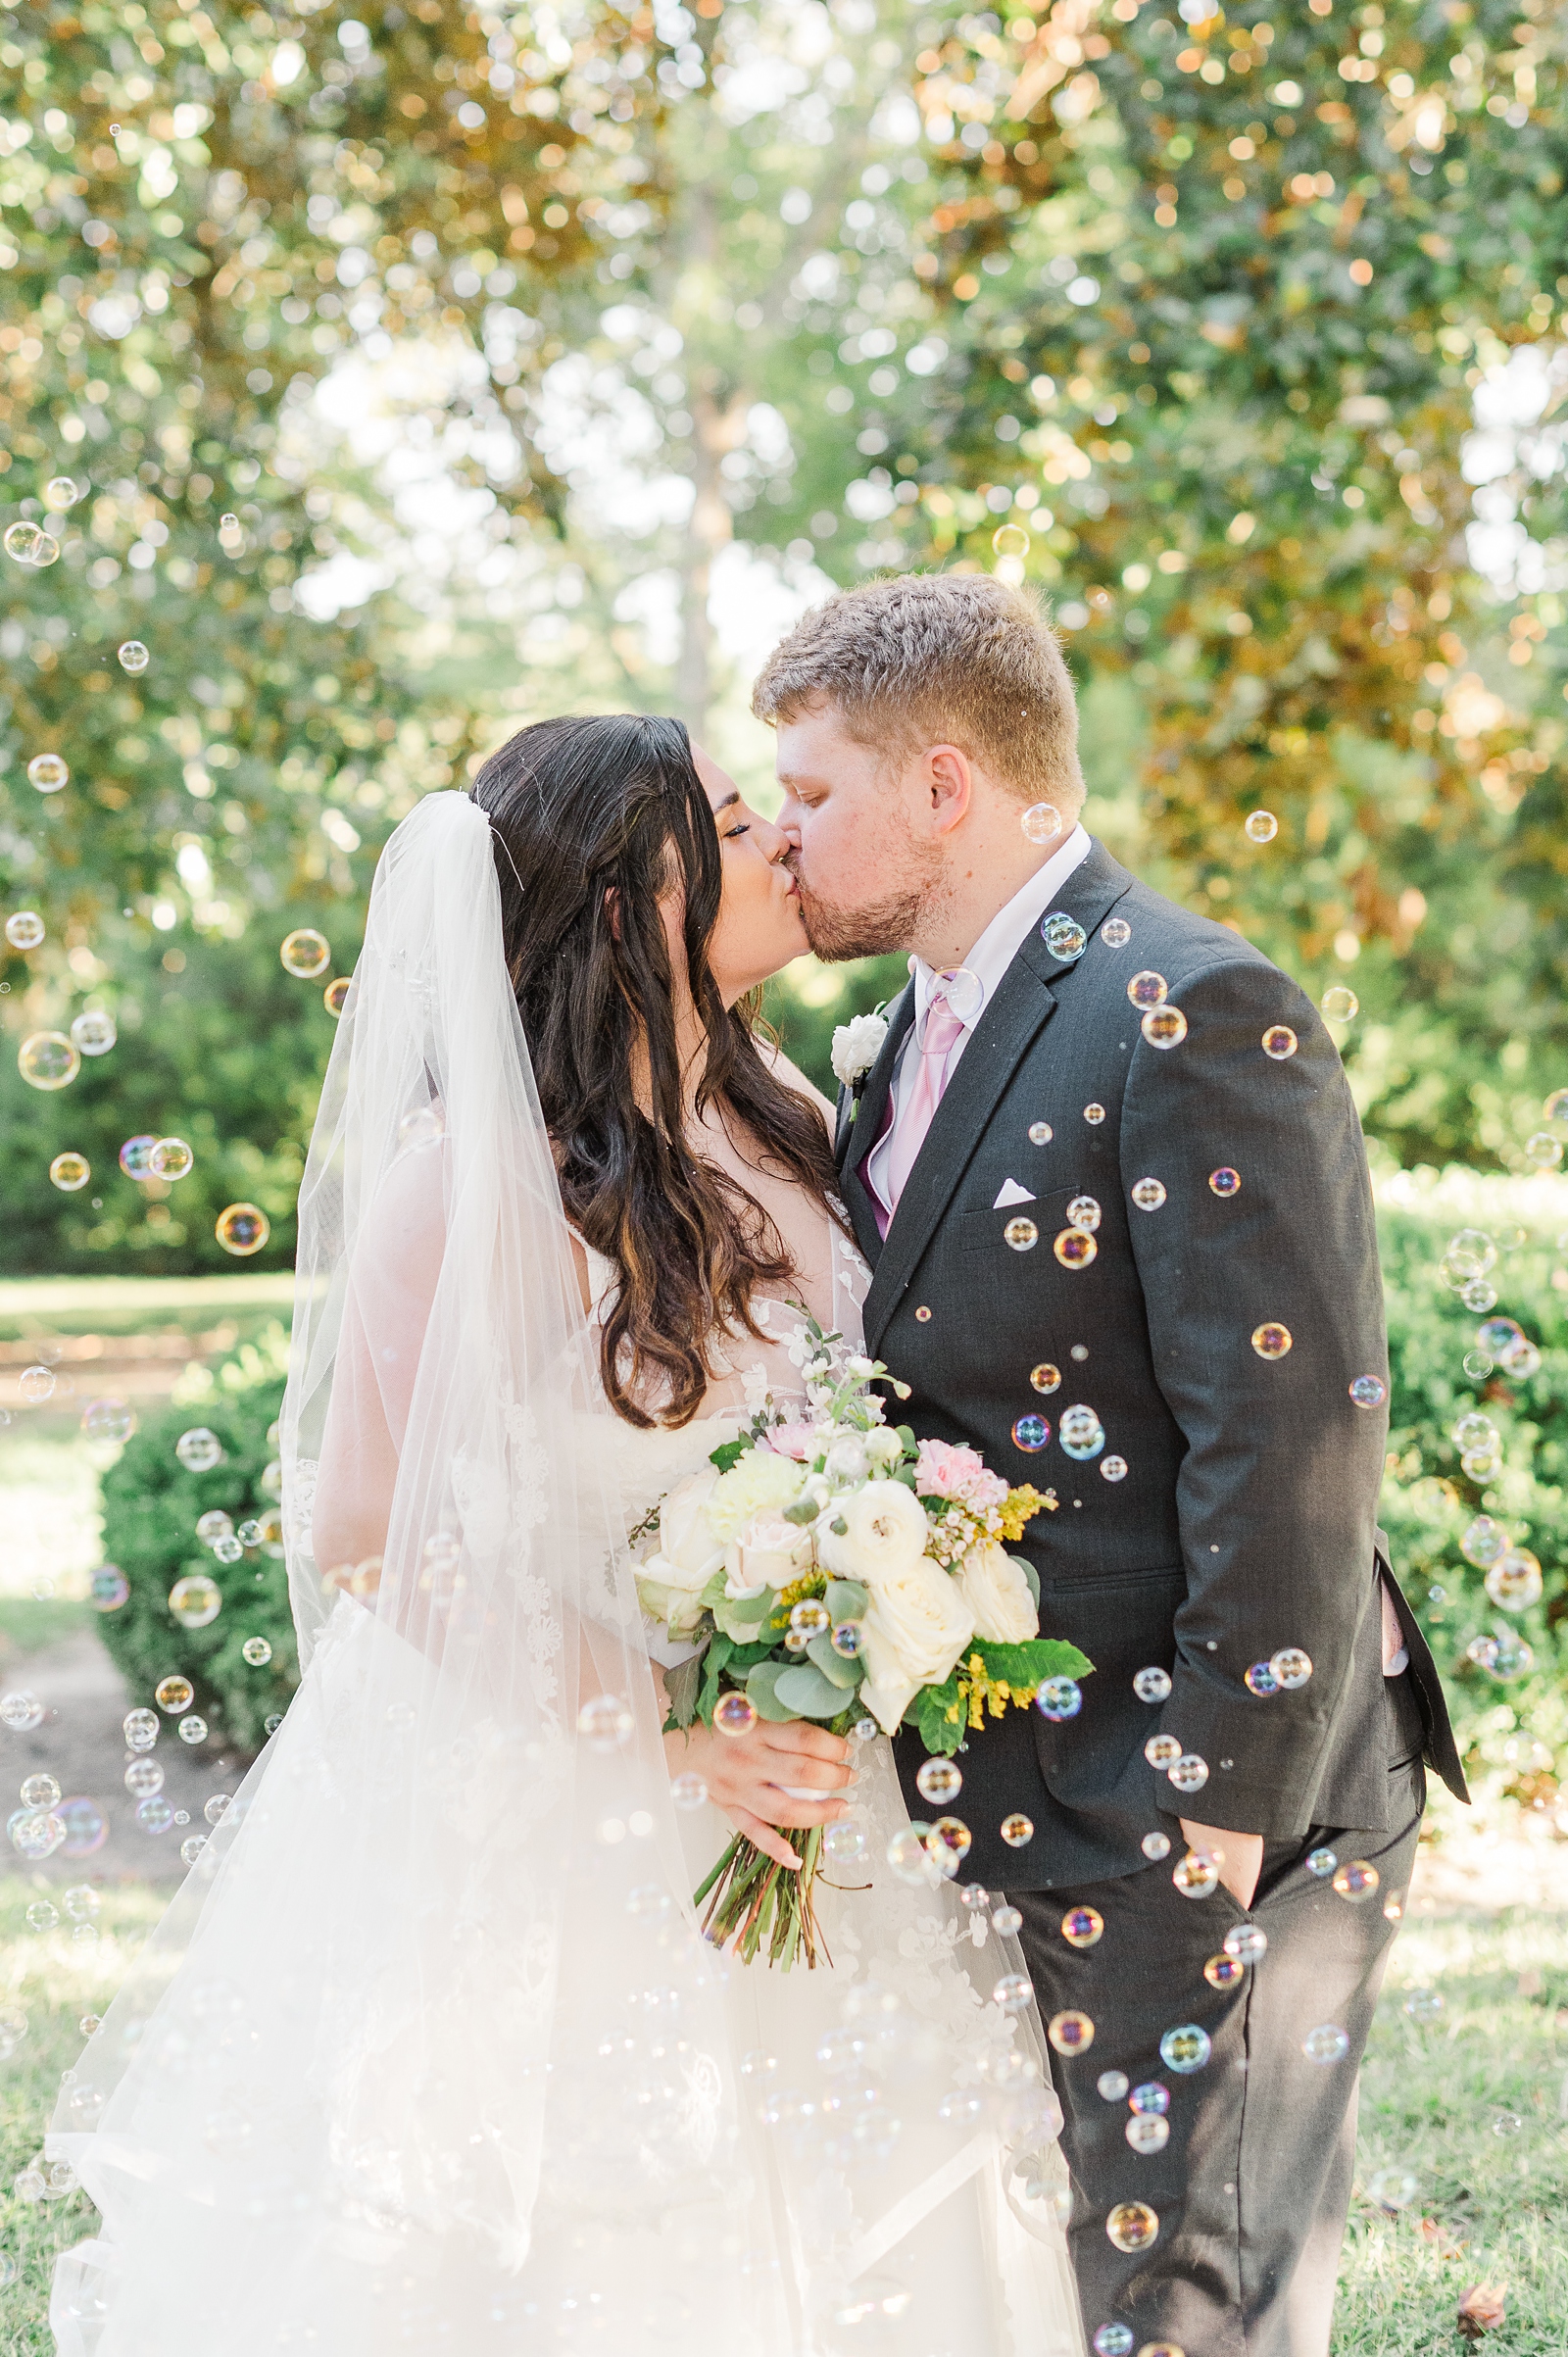 Bride and Groom Portraits with Bubbles at Cumberland Estate Wedding. Photography by Richmond Wedding Photographer Kailey Brianne Photography. 